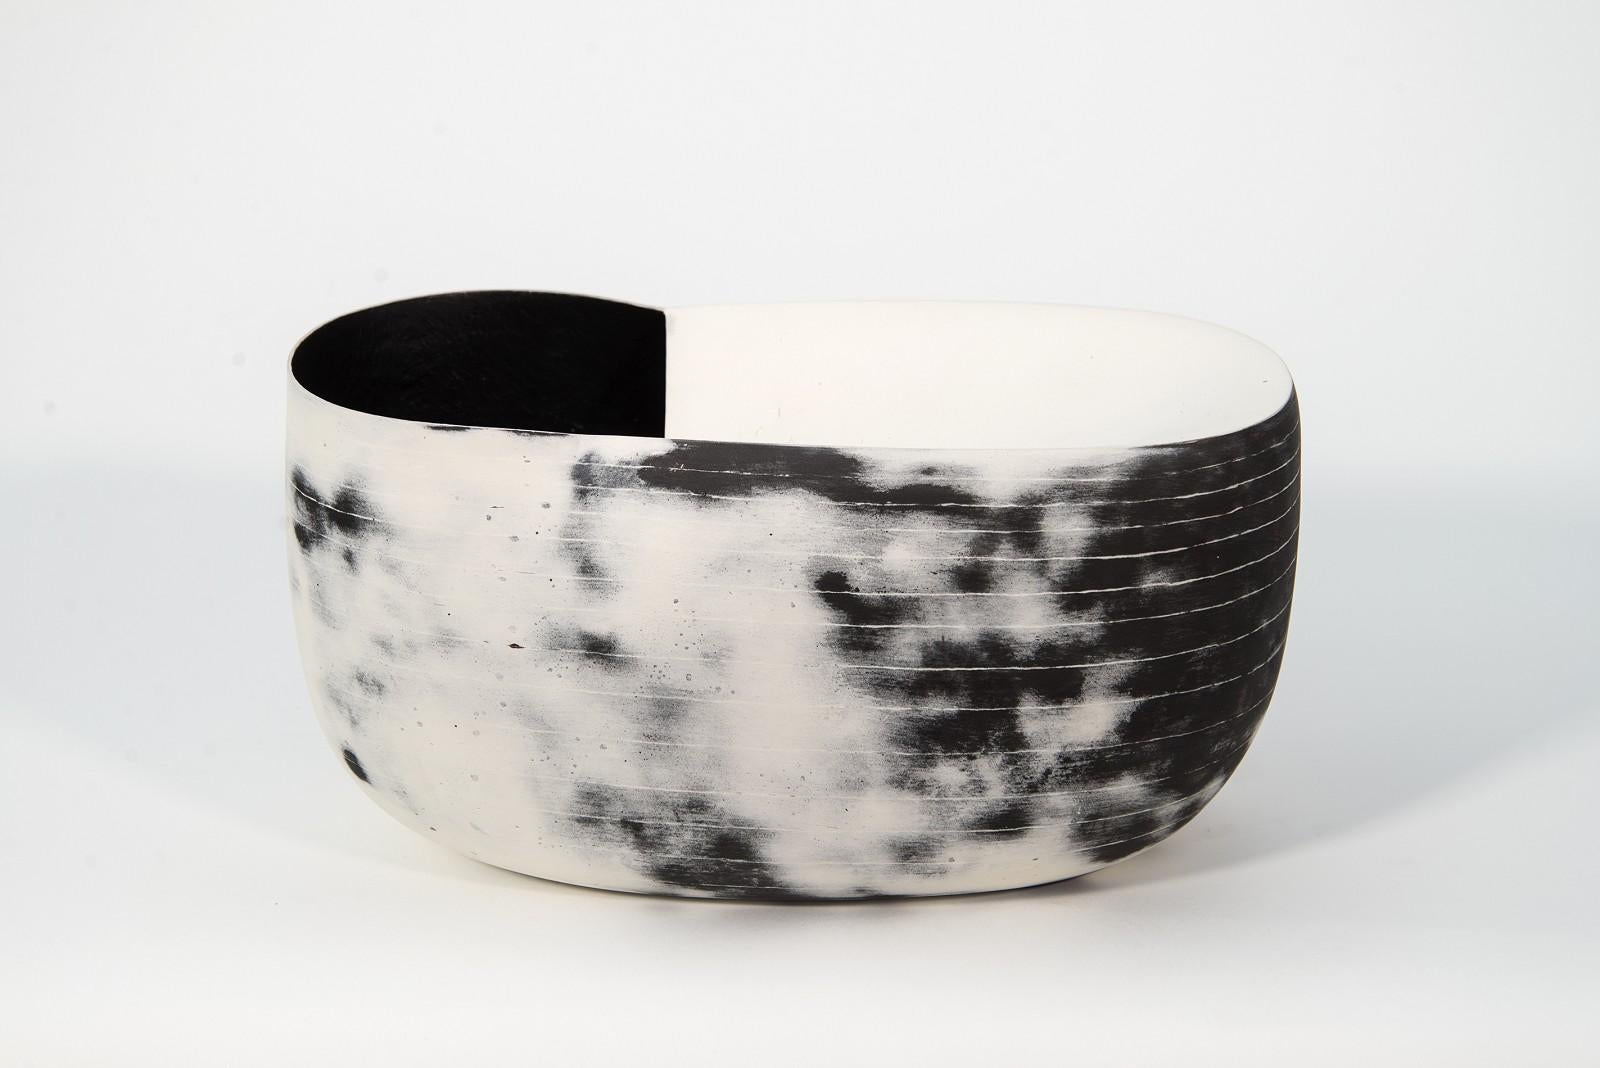 Borealis - black and white, nature inspired, elongated, ceramic, tabletop vessel - Black Abstract Sculpture by Steven Heinemann